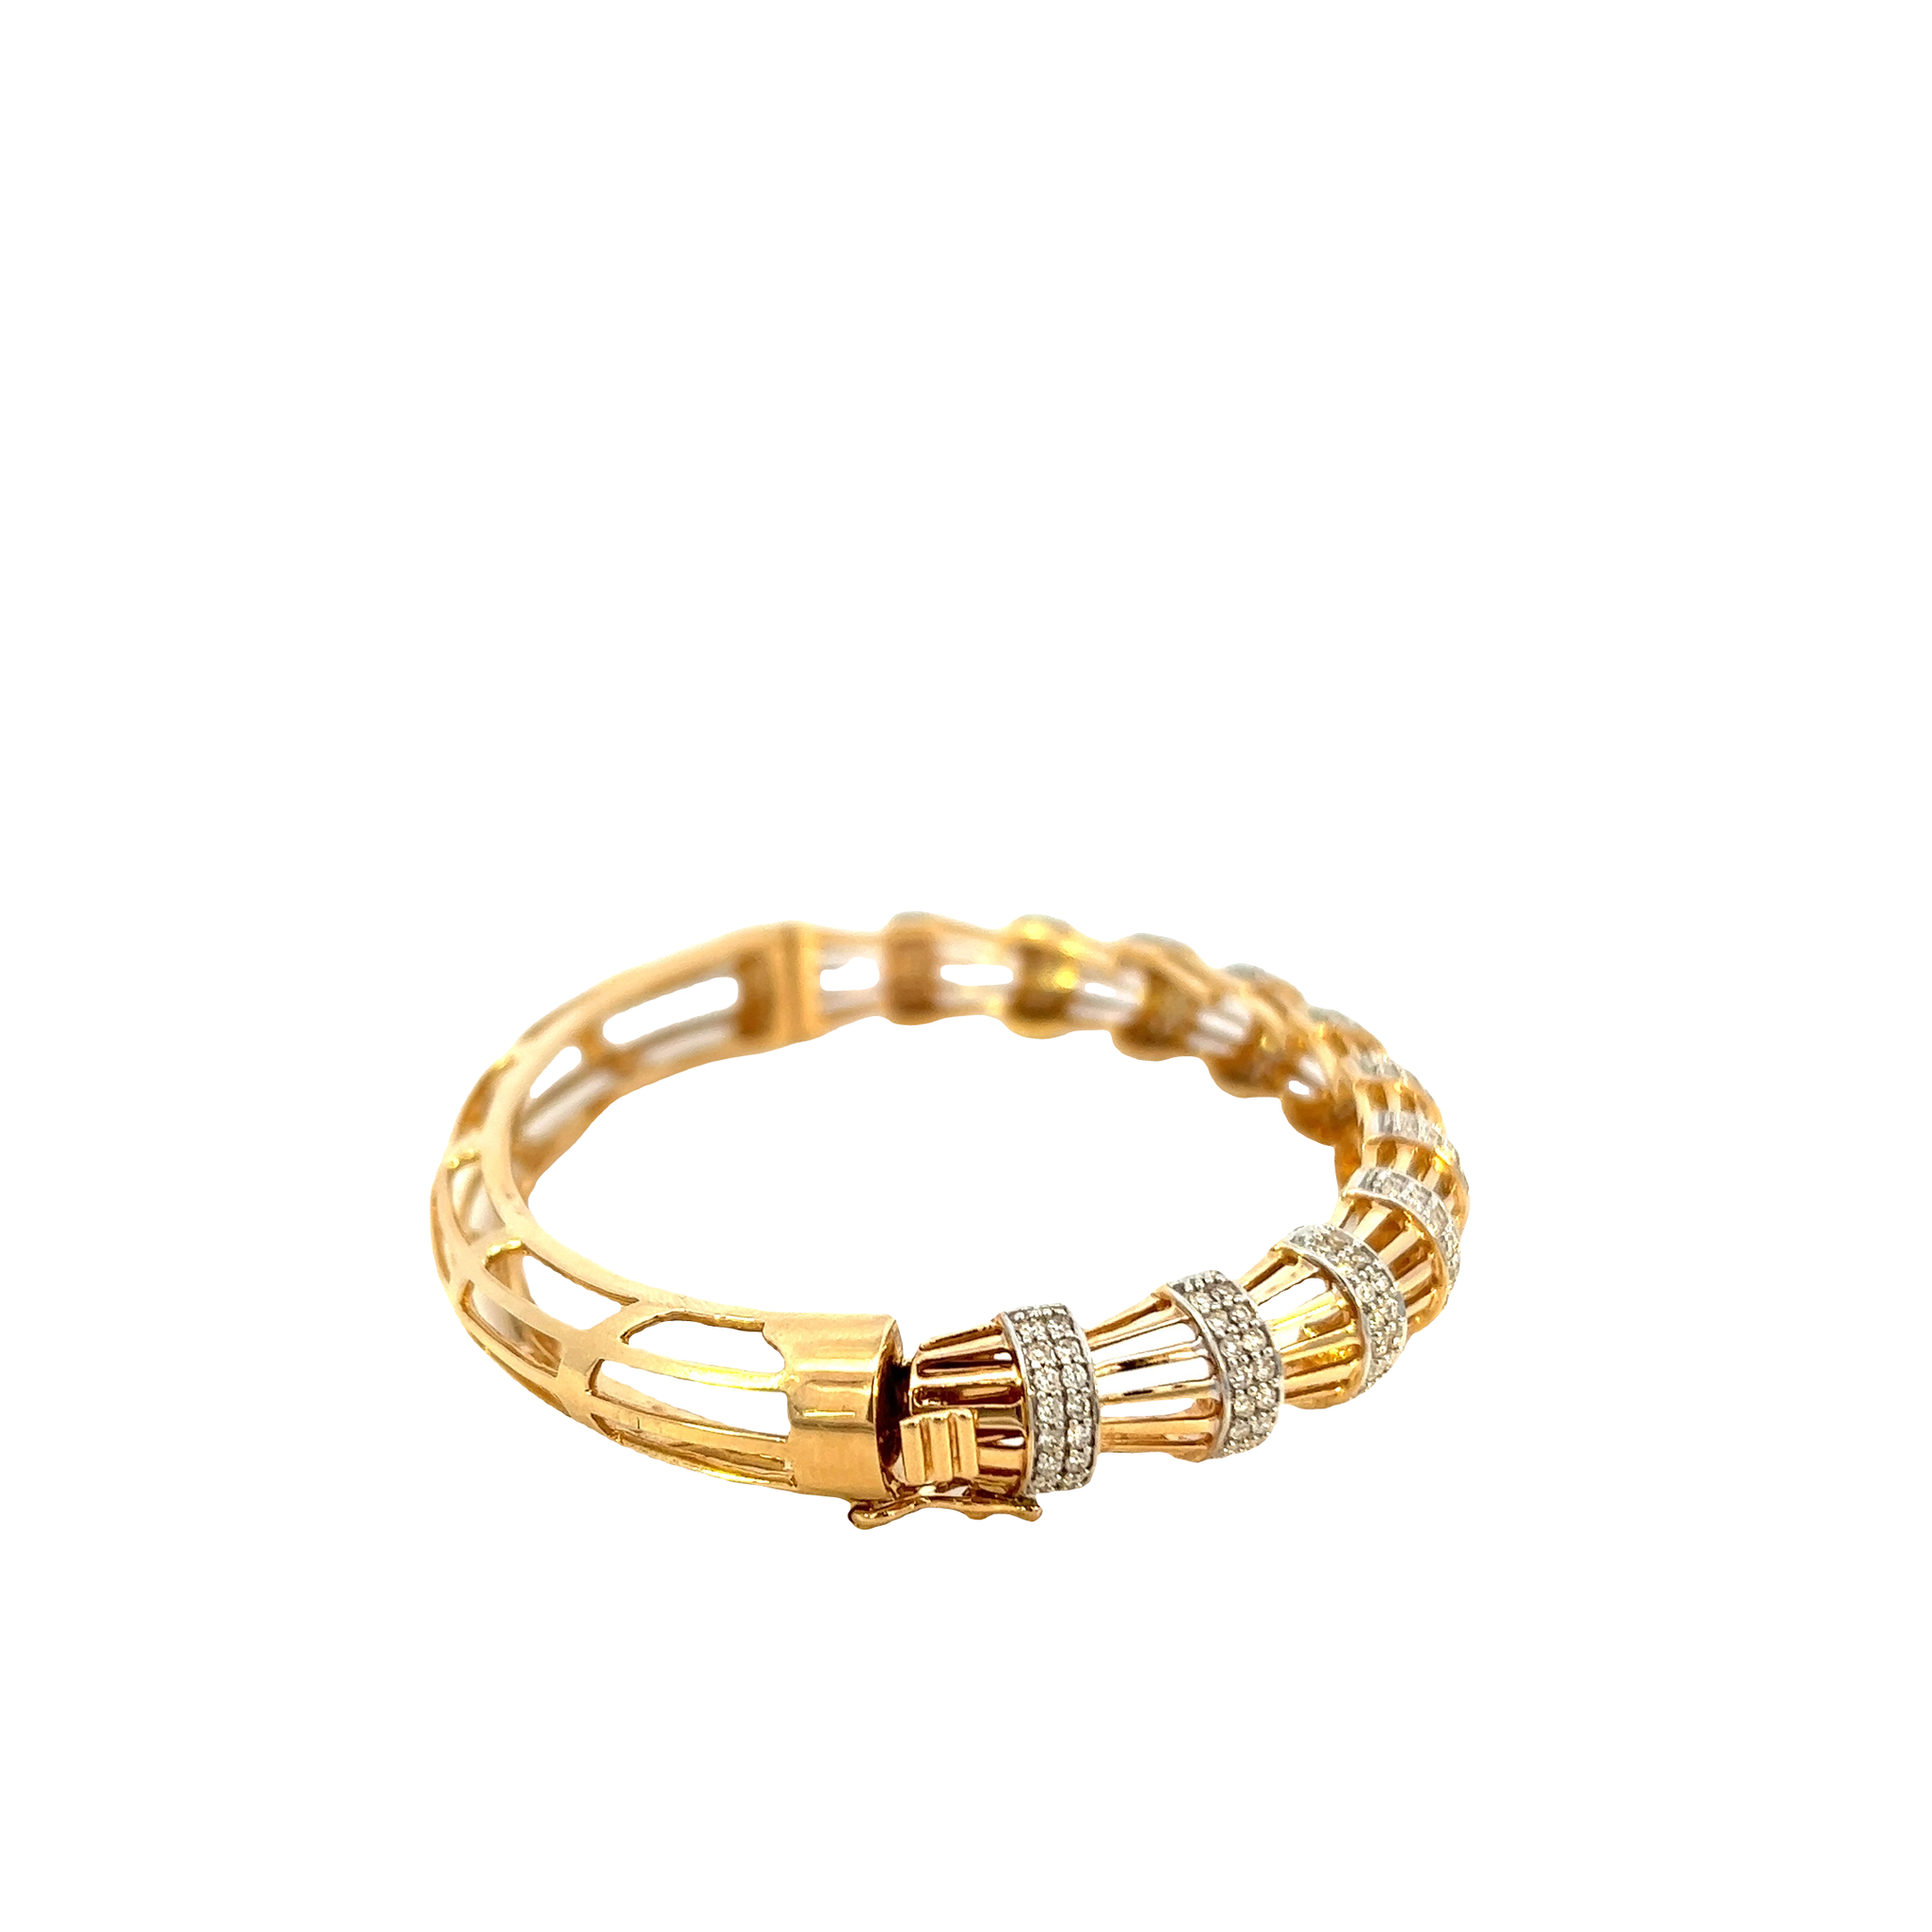 14KT YELLOW GOLD WITH ROUND CUT DIAMONDS FLUTED DESIGN BANGLE.